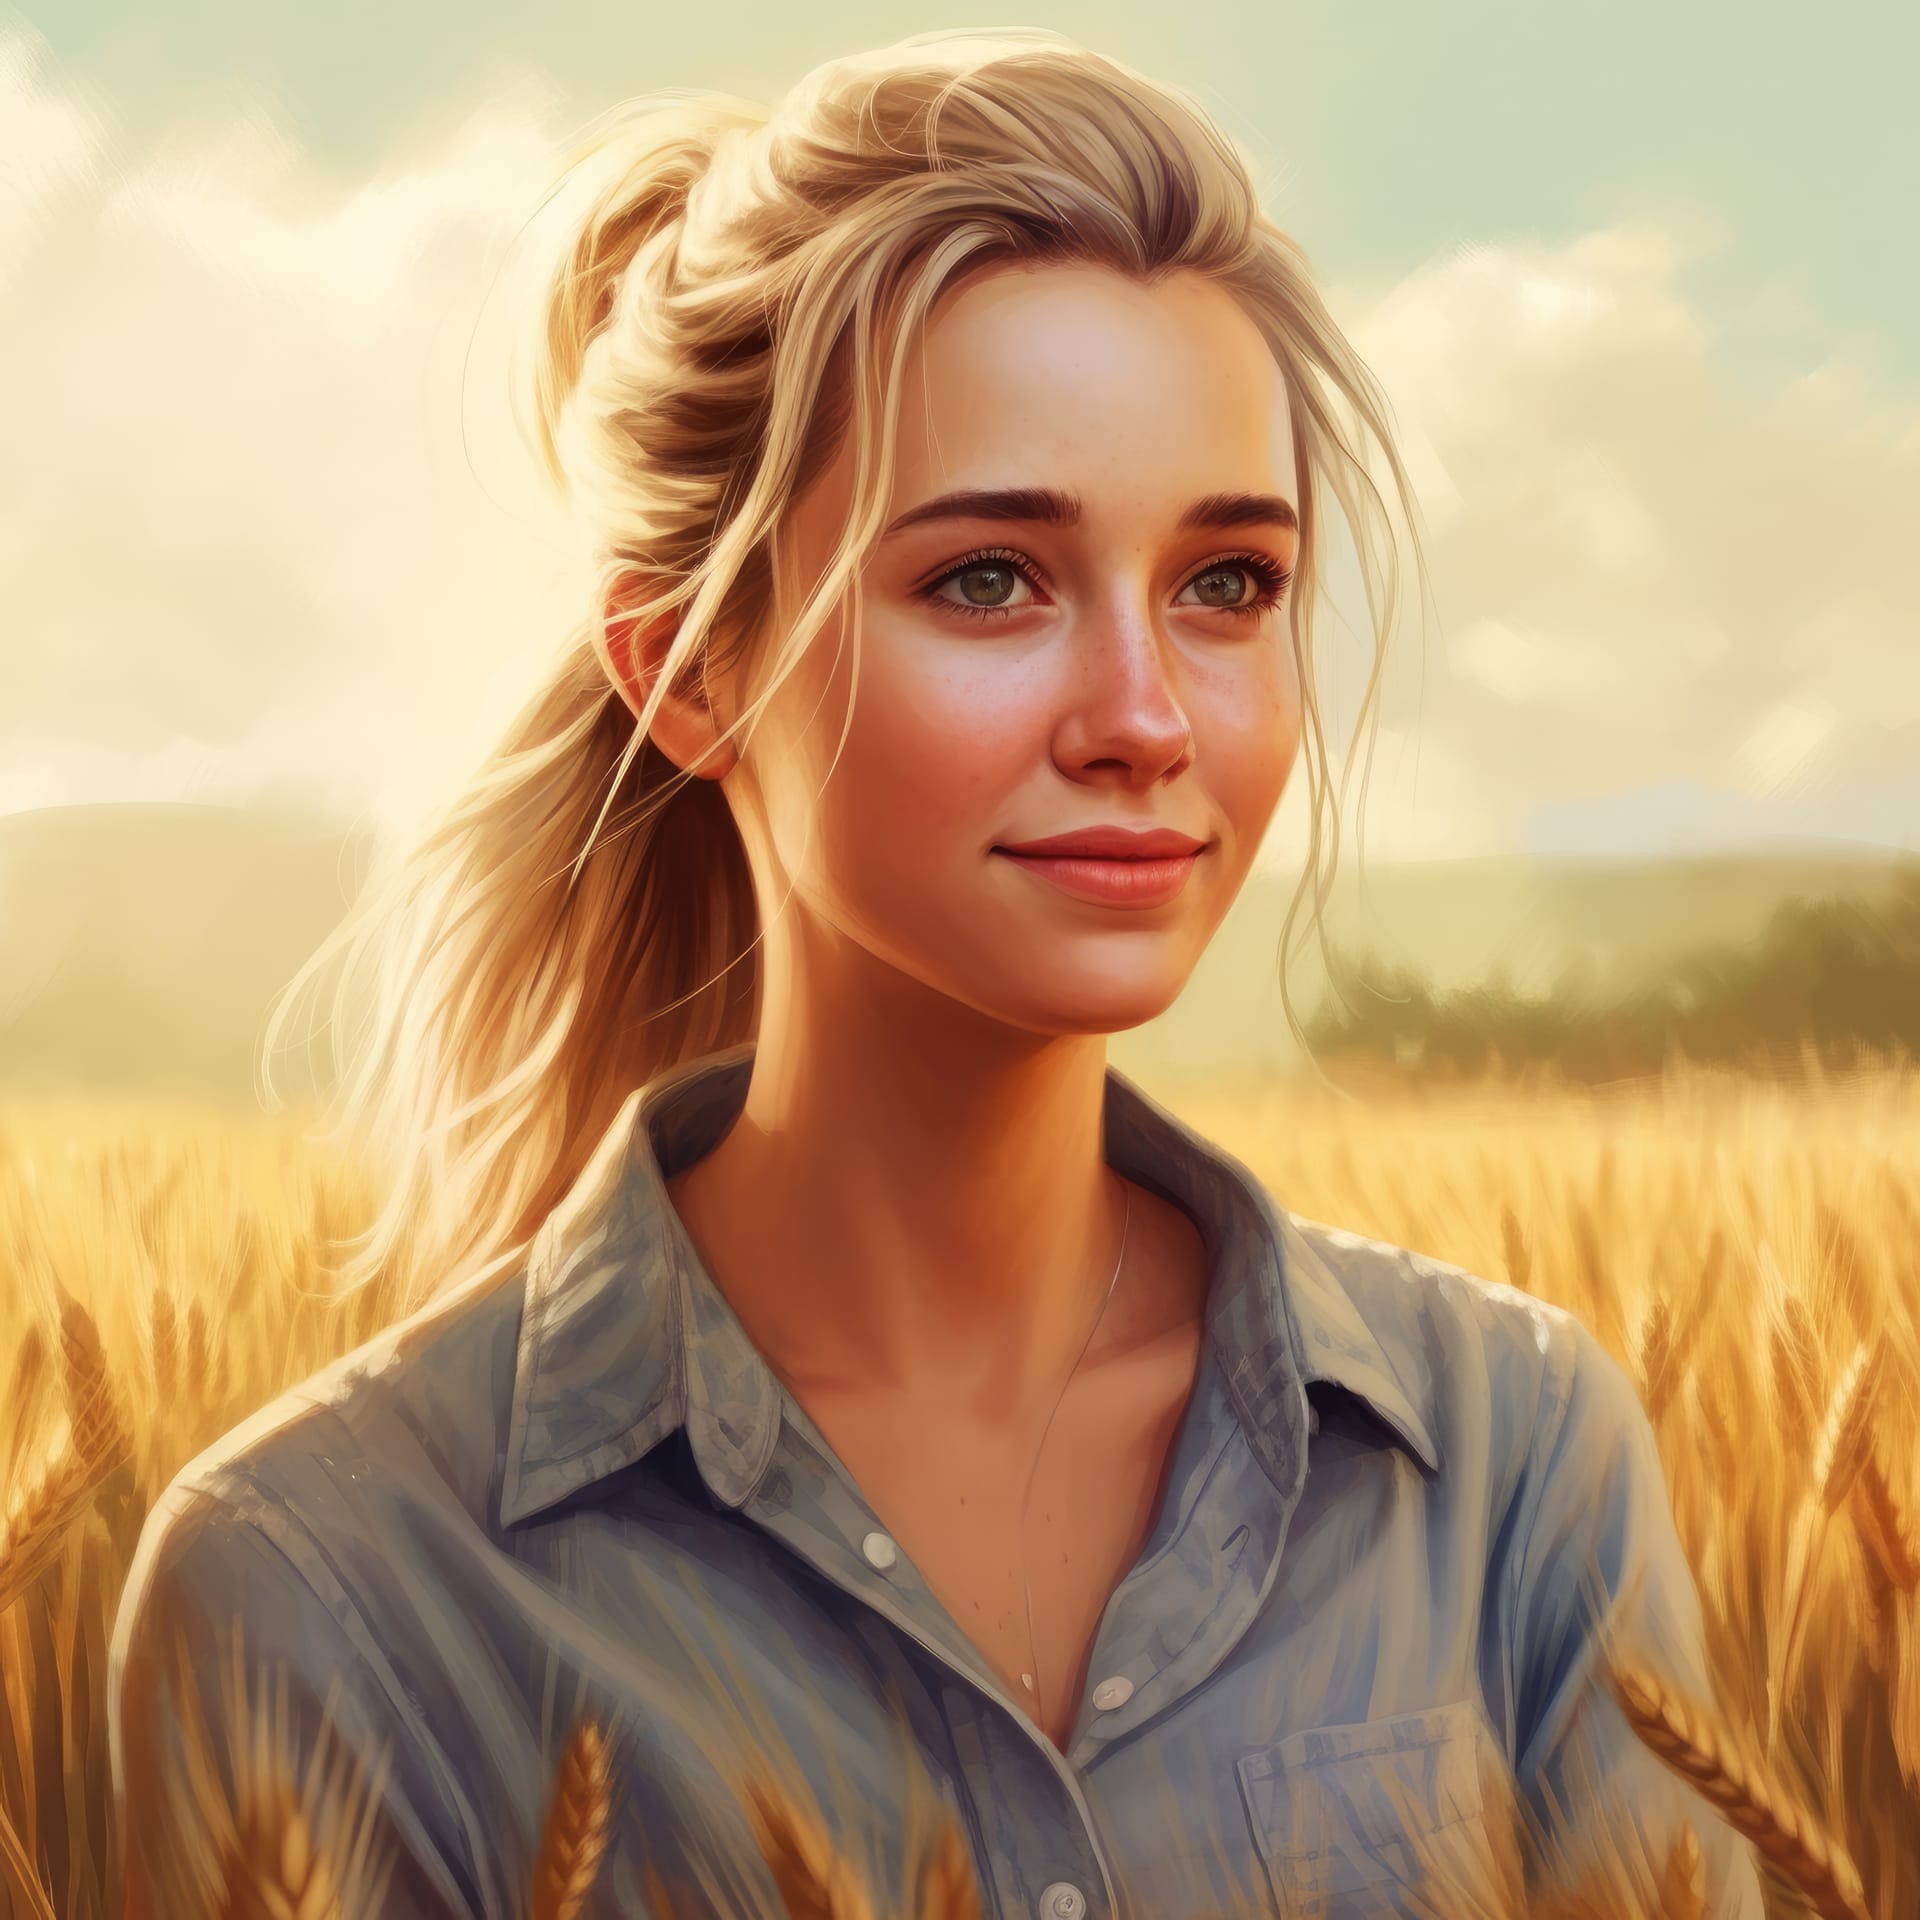 Atmospheric intriguing portrait beautiful woman in the field